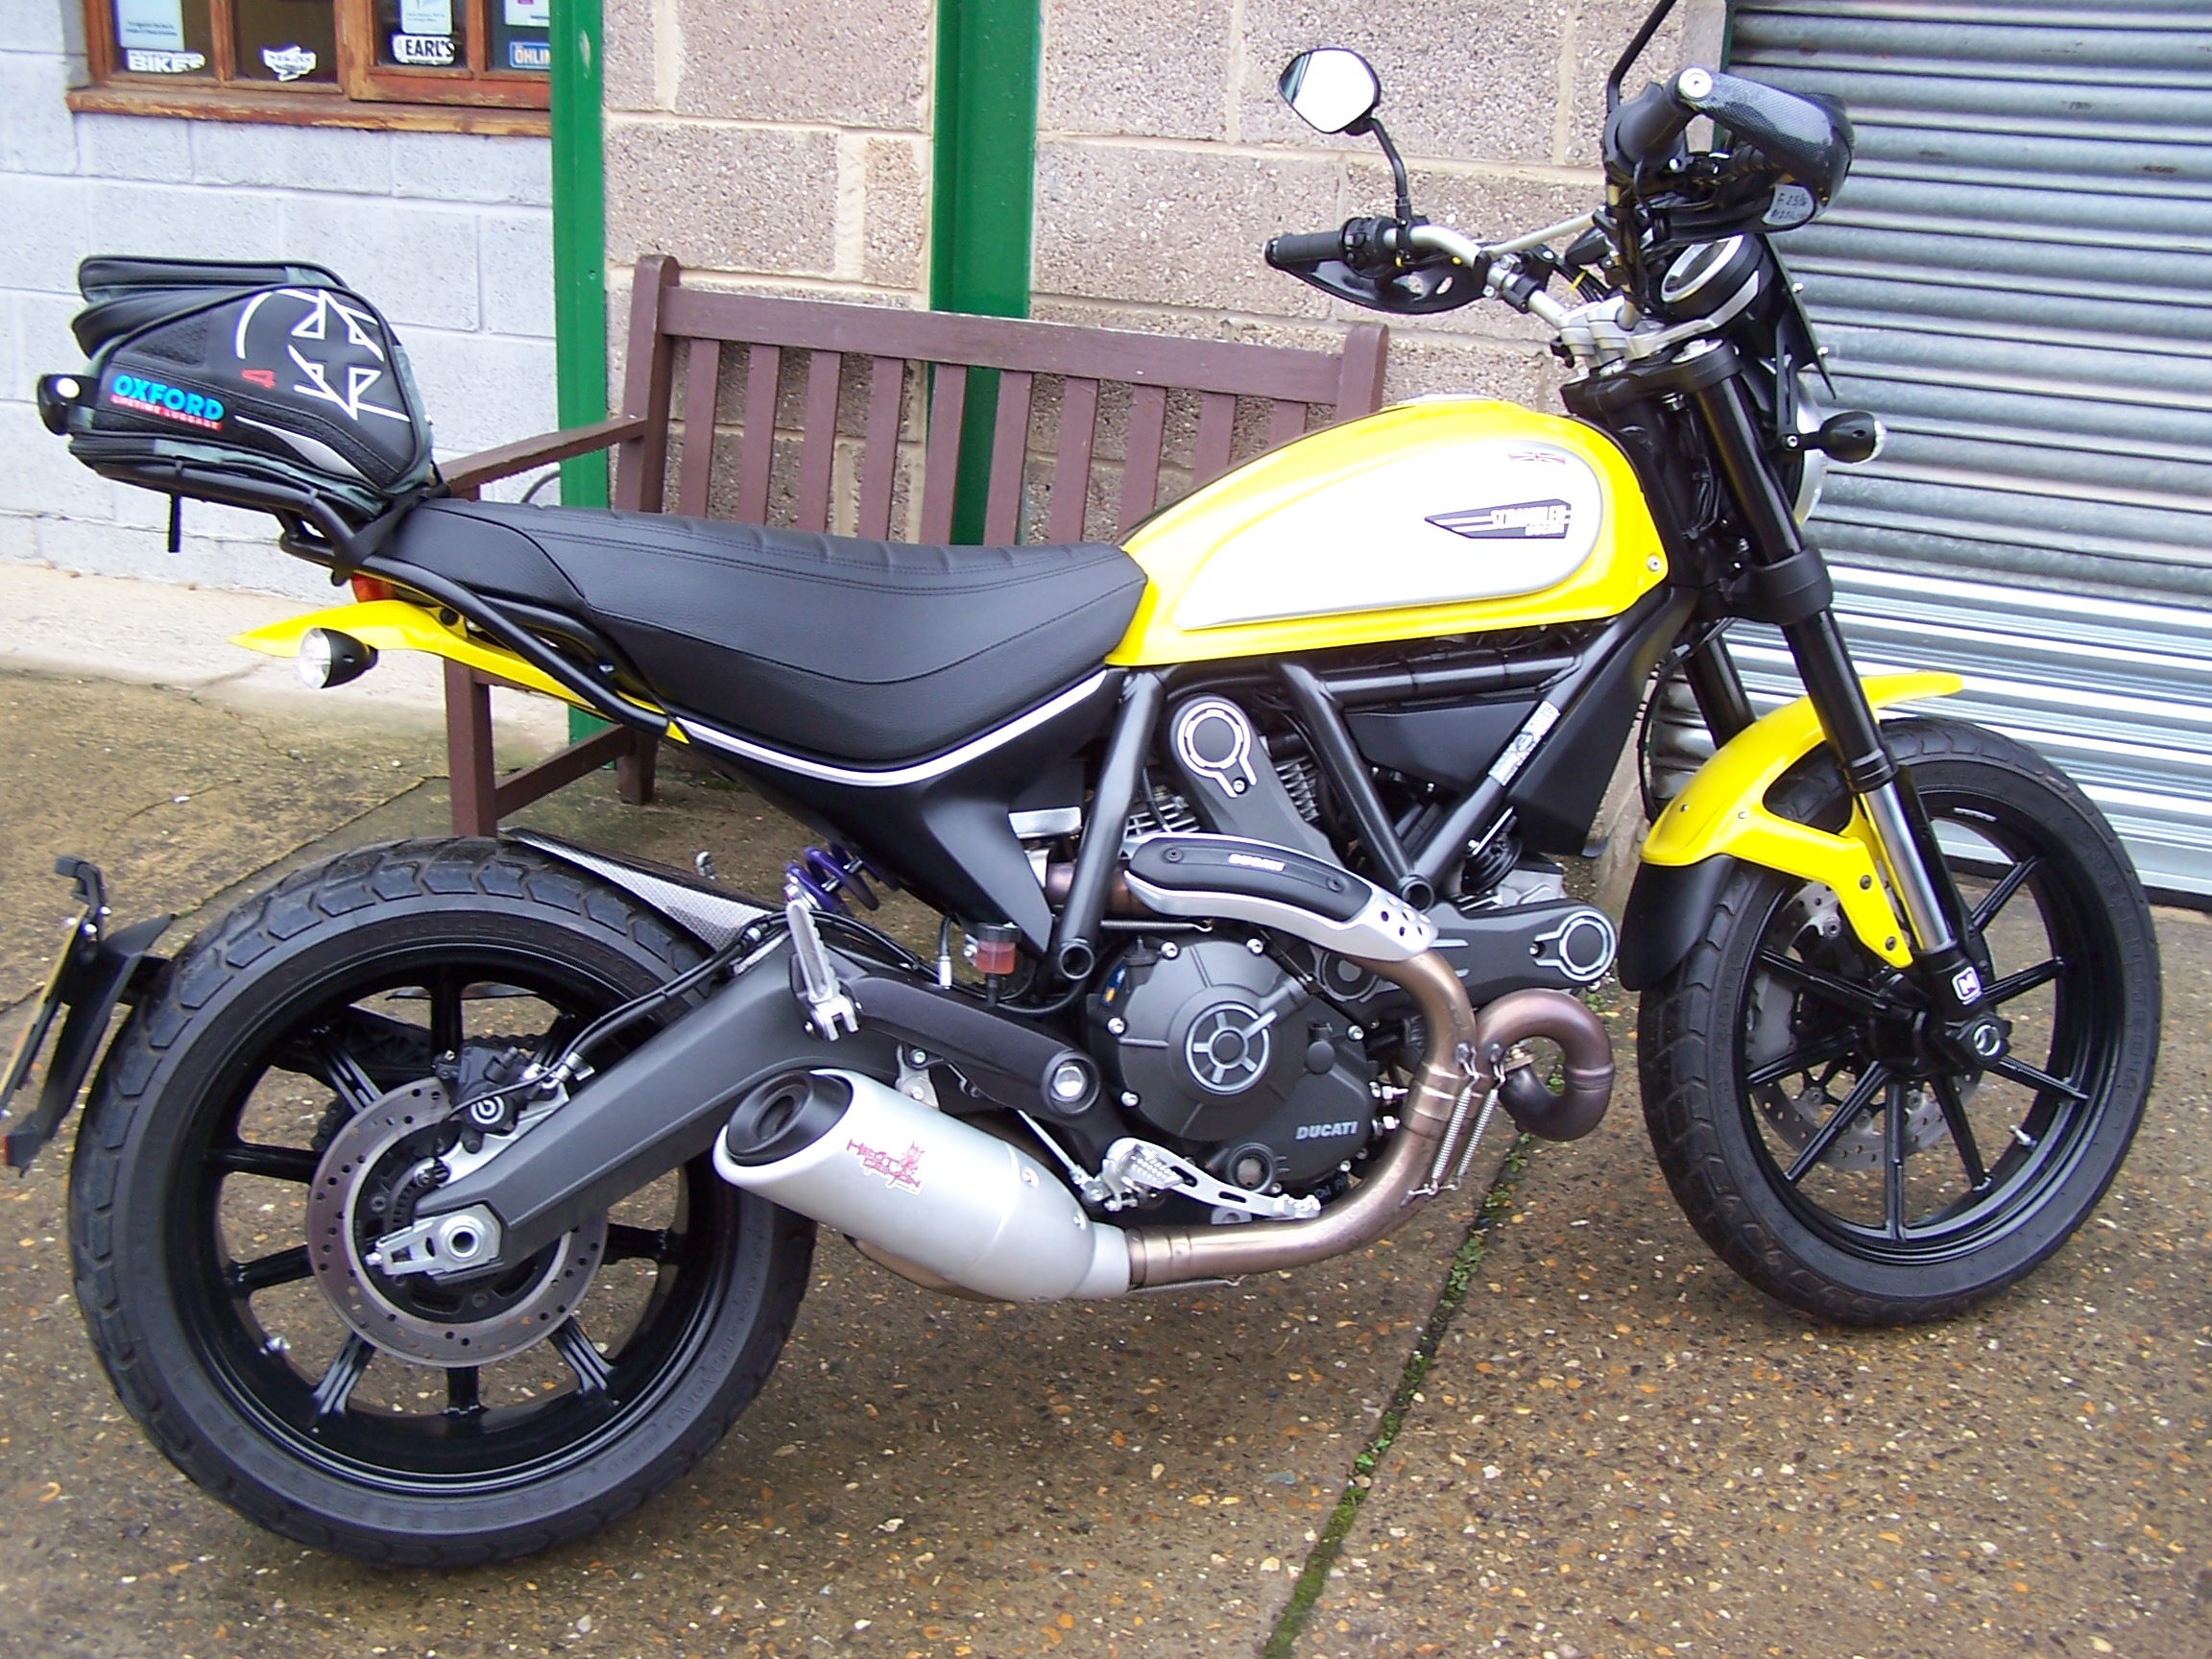 2015 Ducati Scrambler ECU remap – an owner emails his thoughts